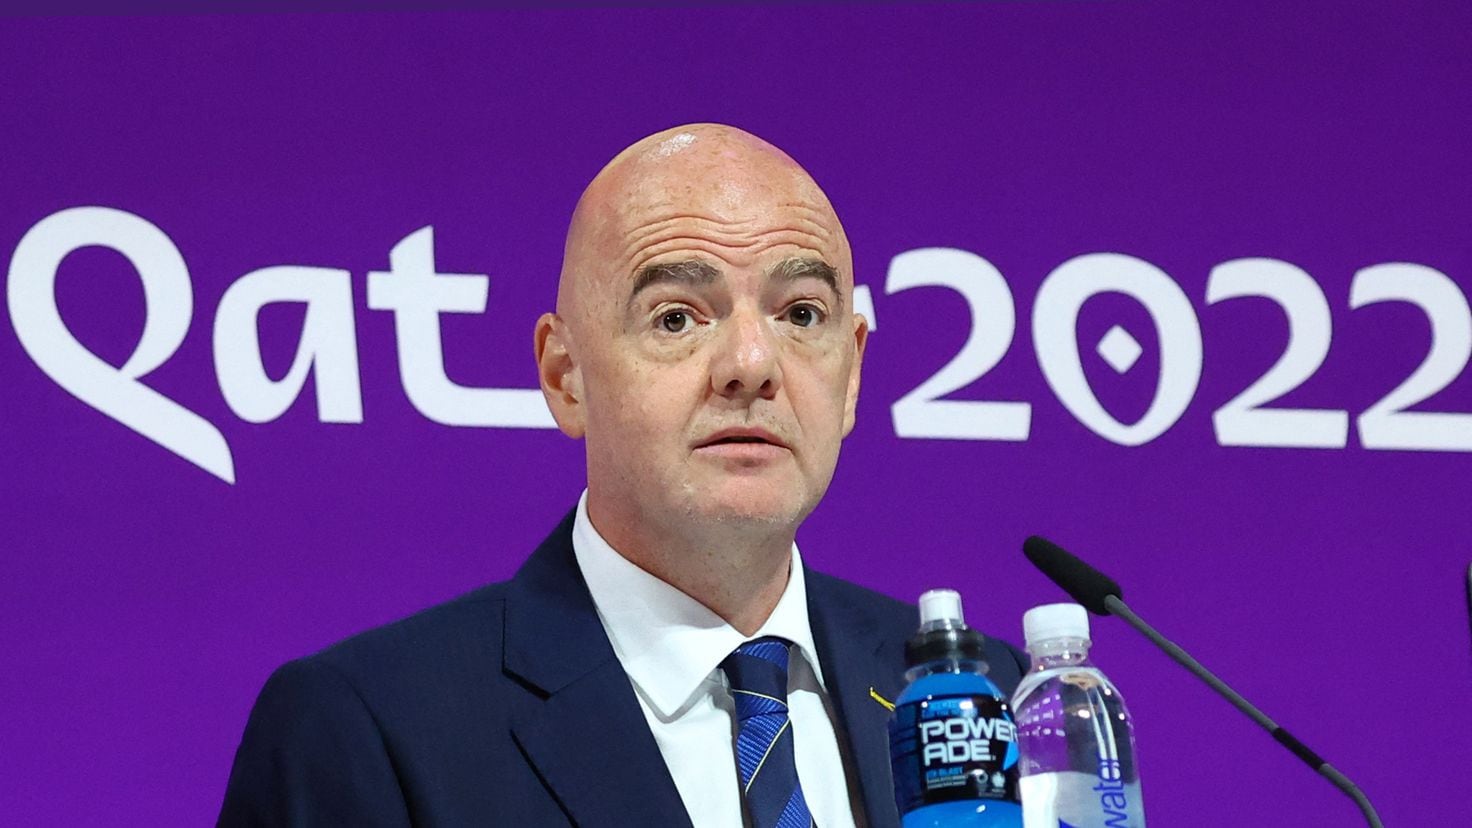 New documents on Qatar’s bribes to FIFA for 2022 World Cup have been released.